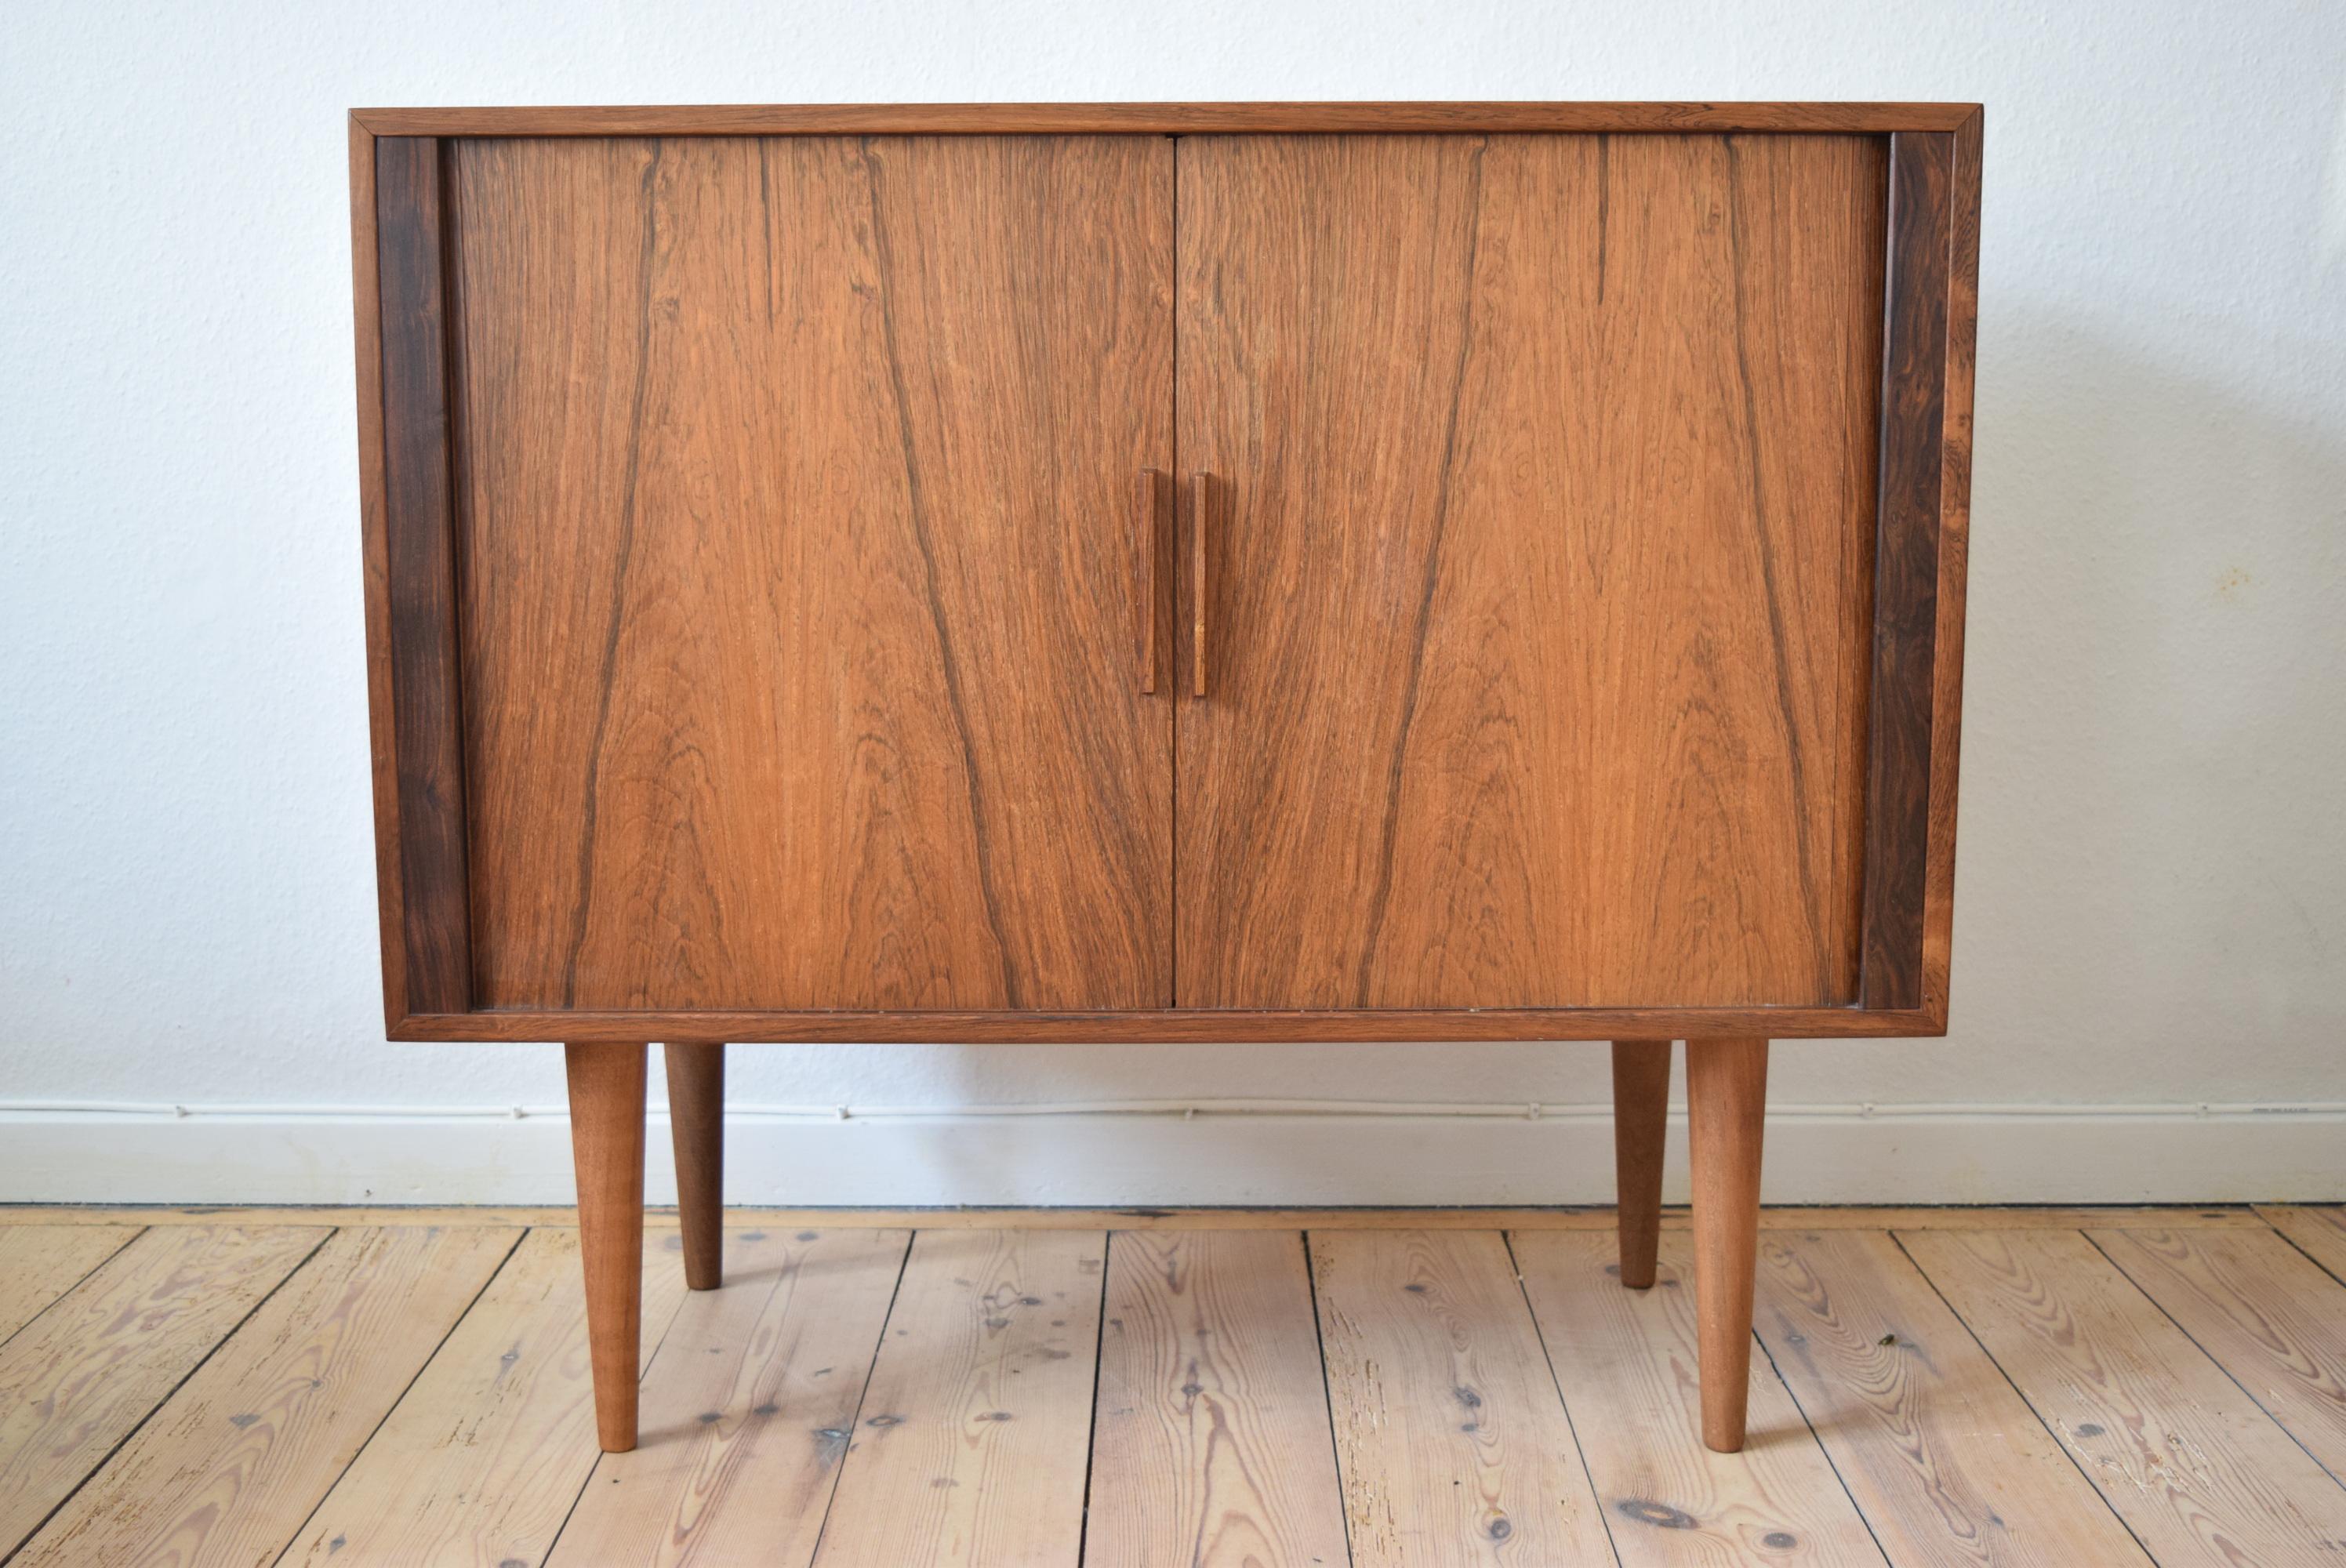 Danish rosewood record player cabinet by Kai Kristiansen for FM Møbler. Manufactured in the 1960s, this piece features two tambour doors with internal shelving space for LP records and lower section for media devices. Striking rosewood grain